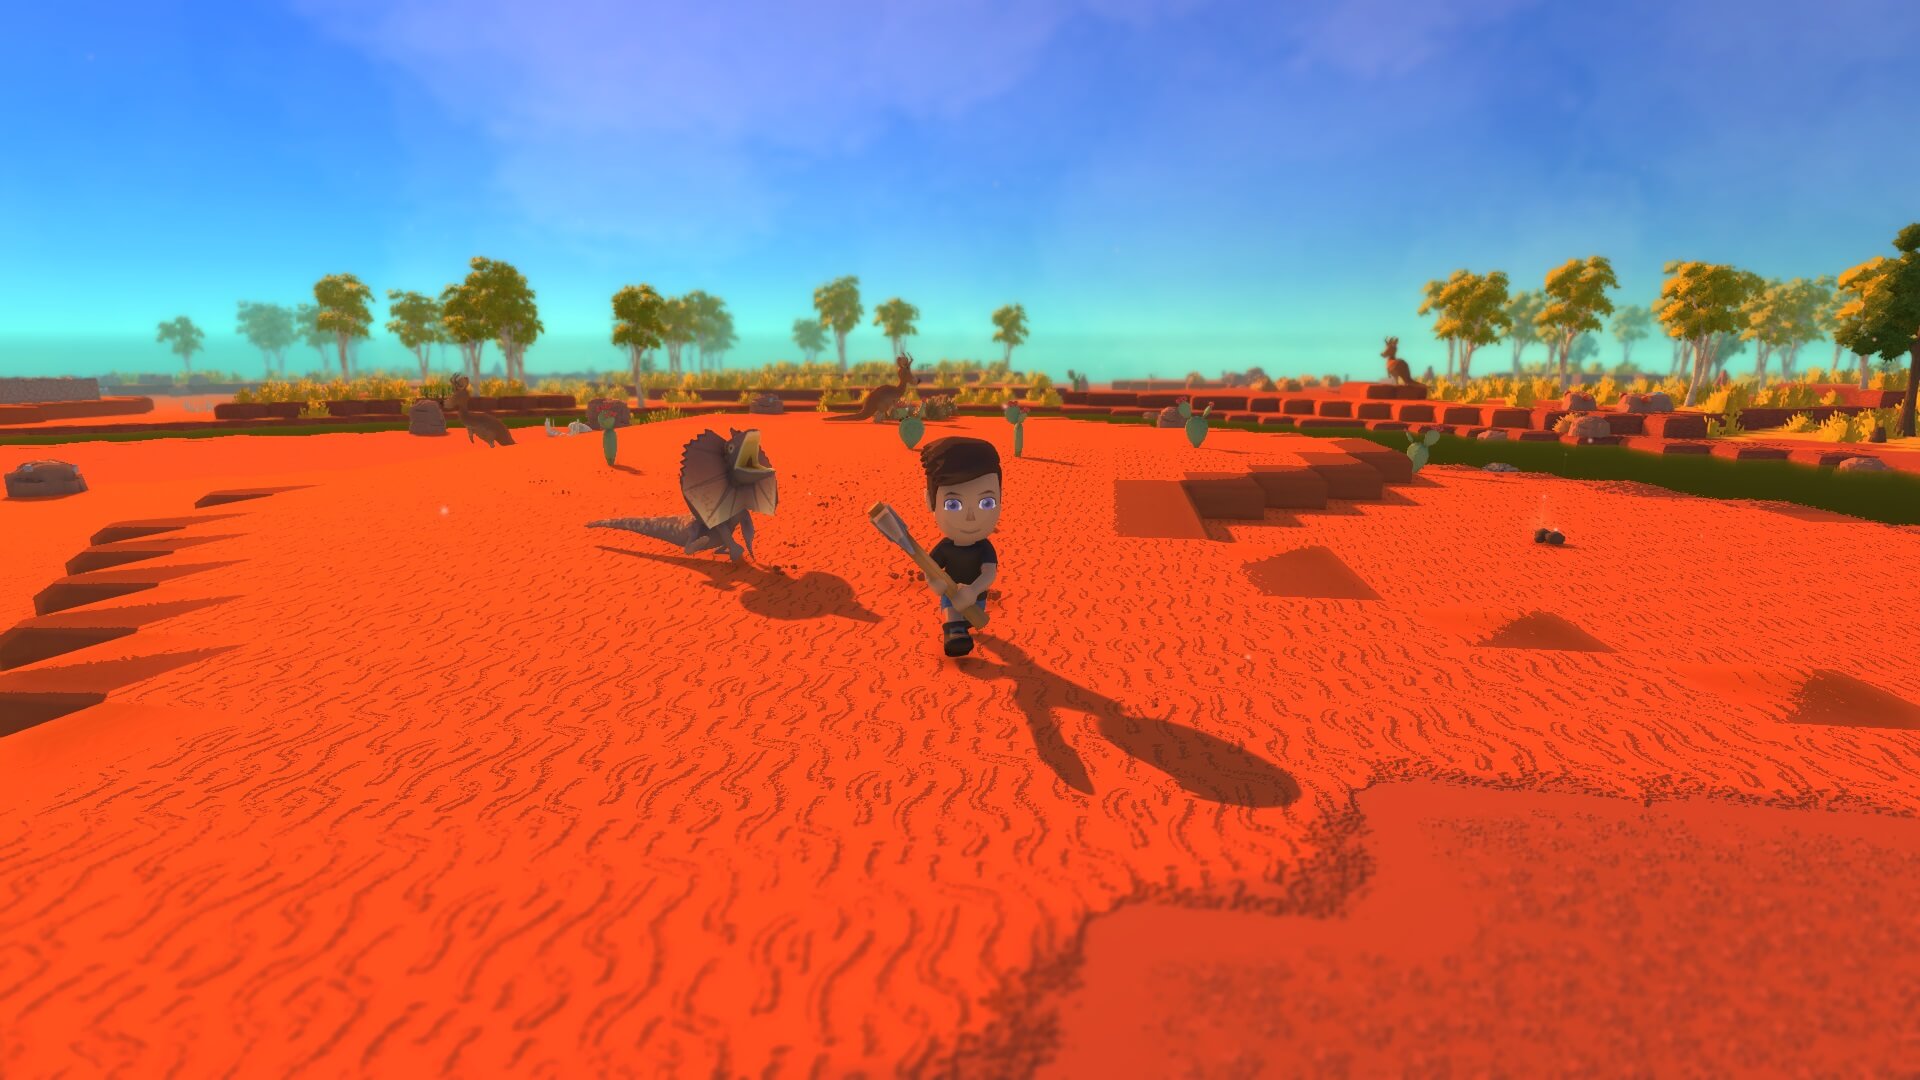 Dinkum update shows the player presumably being chased by a Frilly.